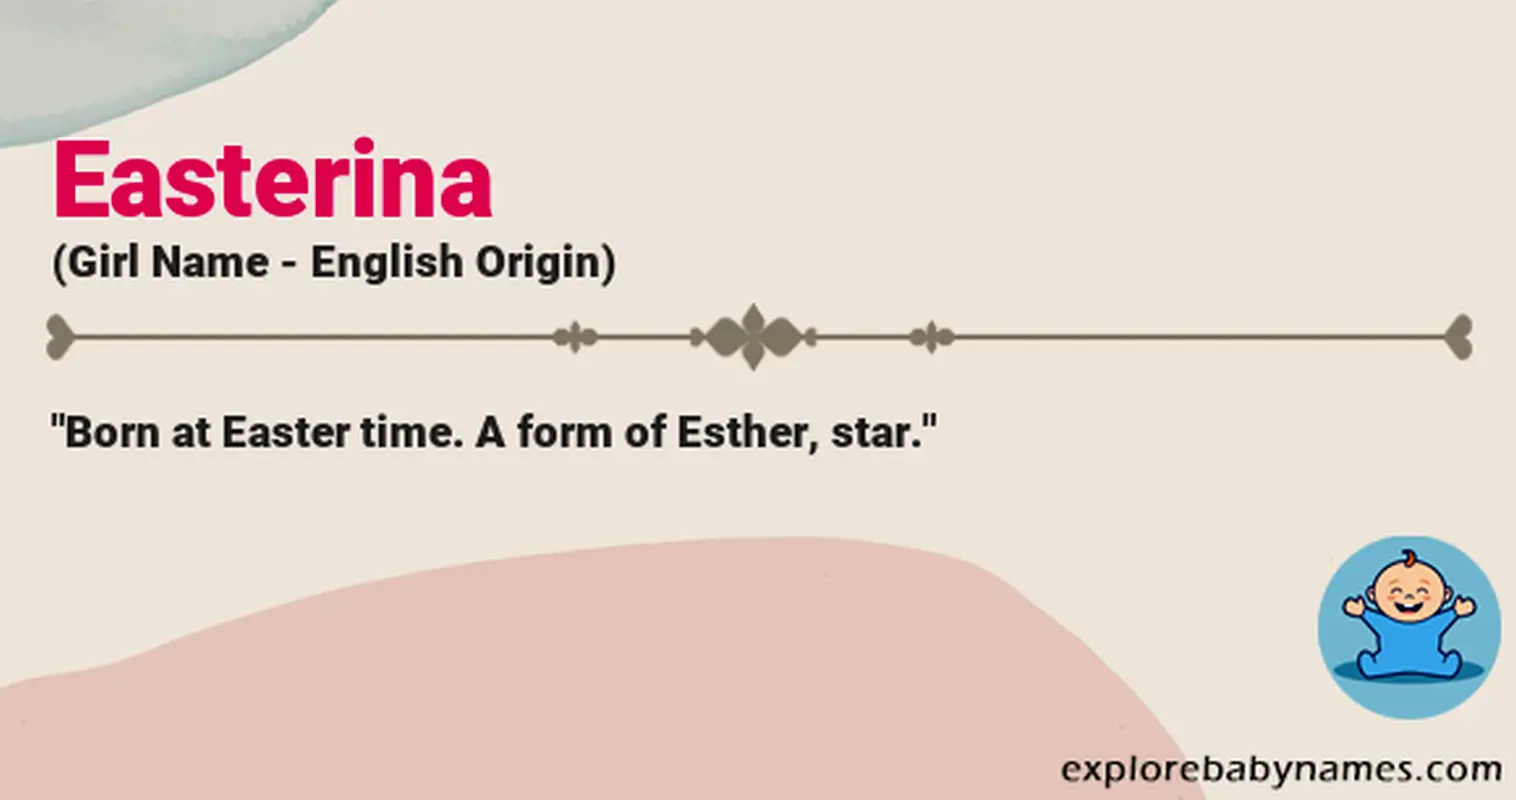 Meaning of Easterina